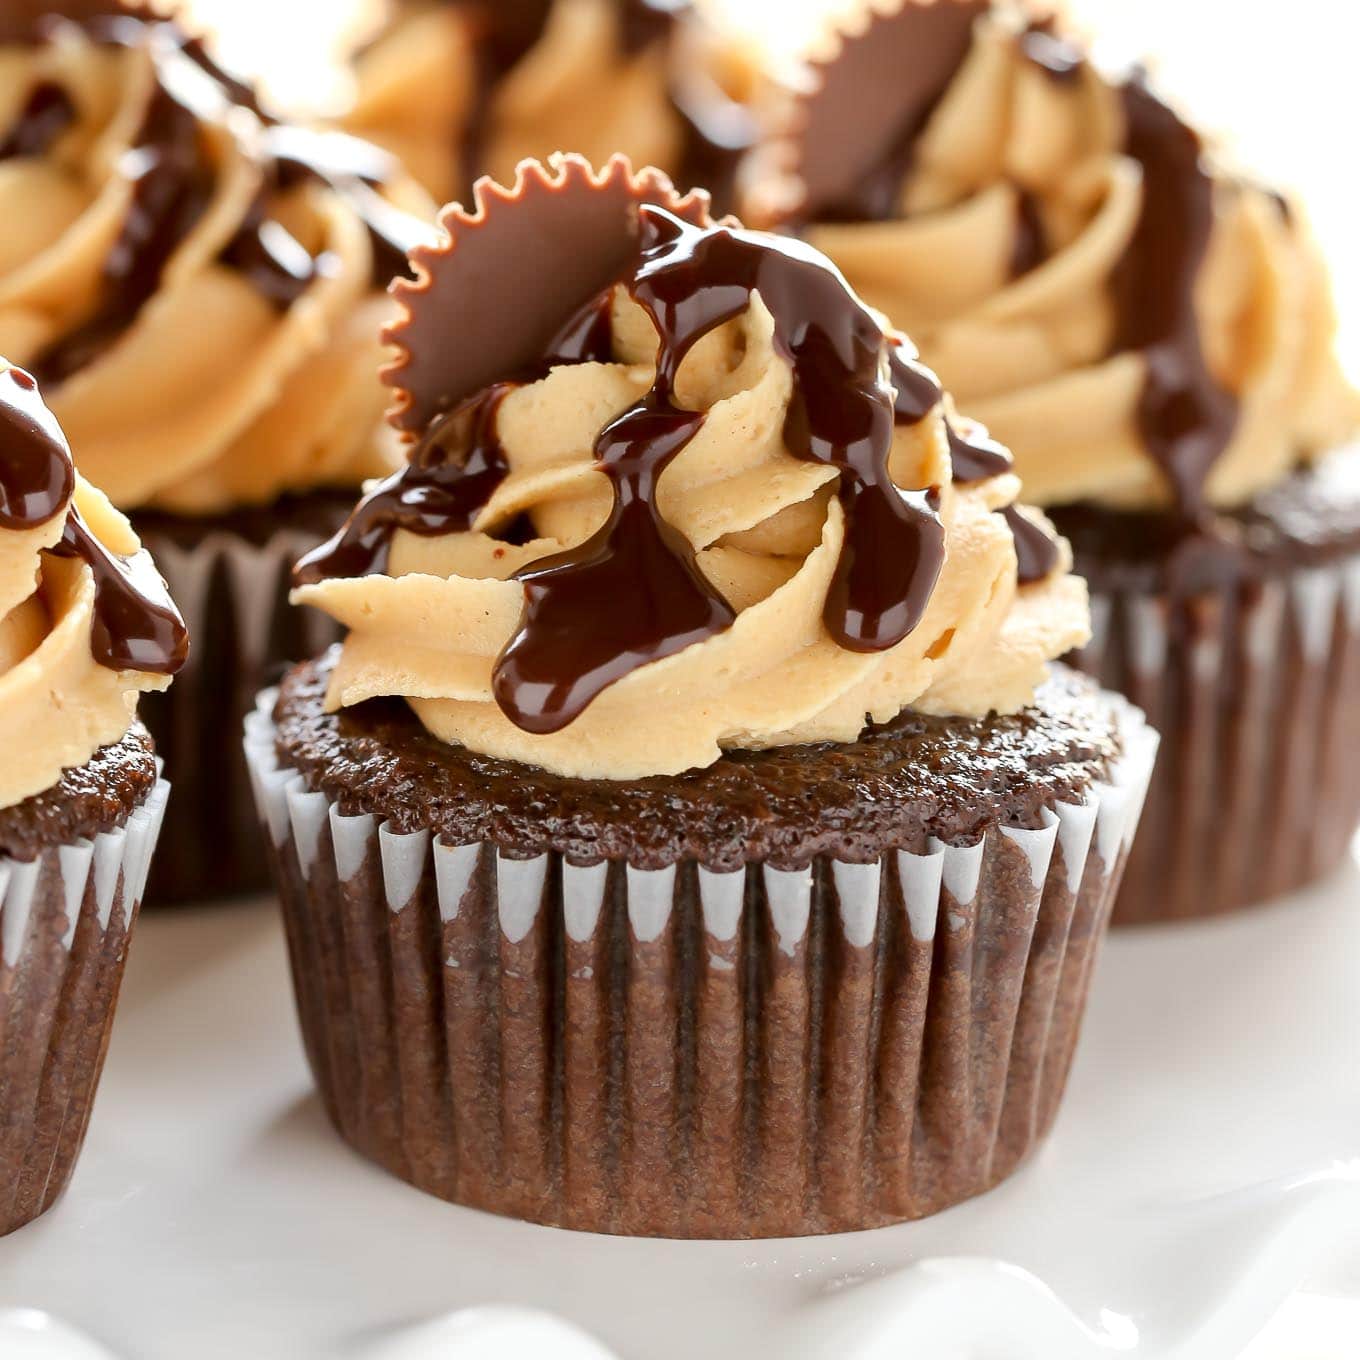 Chocolate-Cupcakes-with-Peanut-Butter-Frosting-1-5.jpg